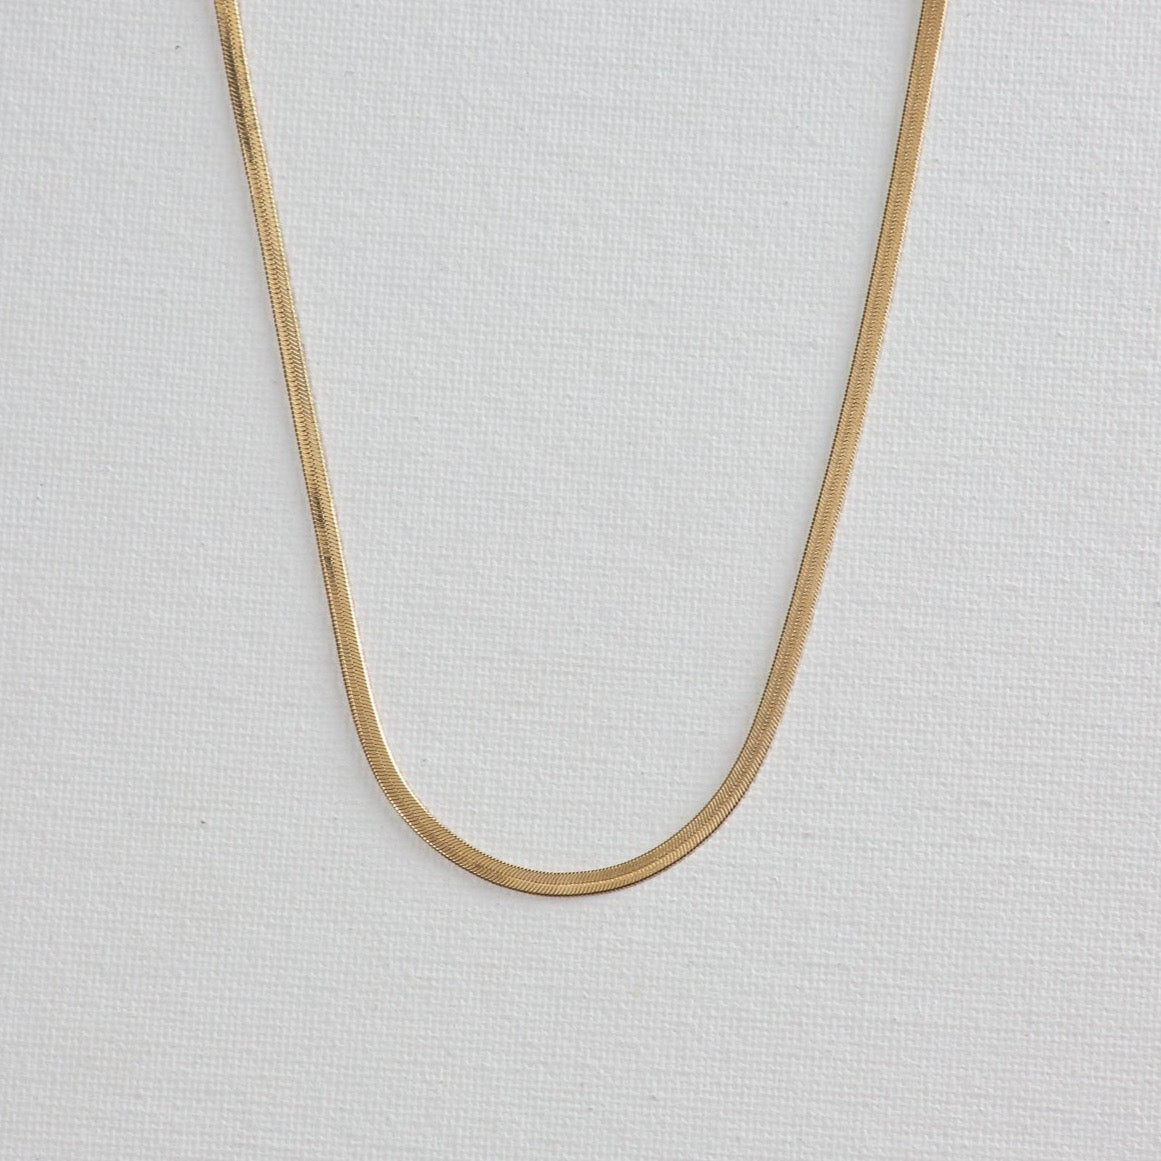 The gold necklace laying flat on a white background.